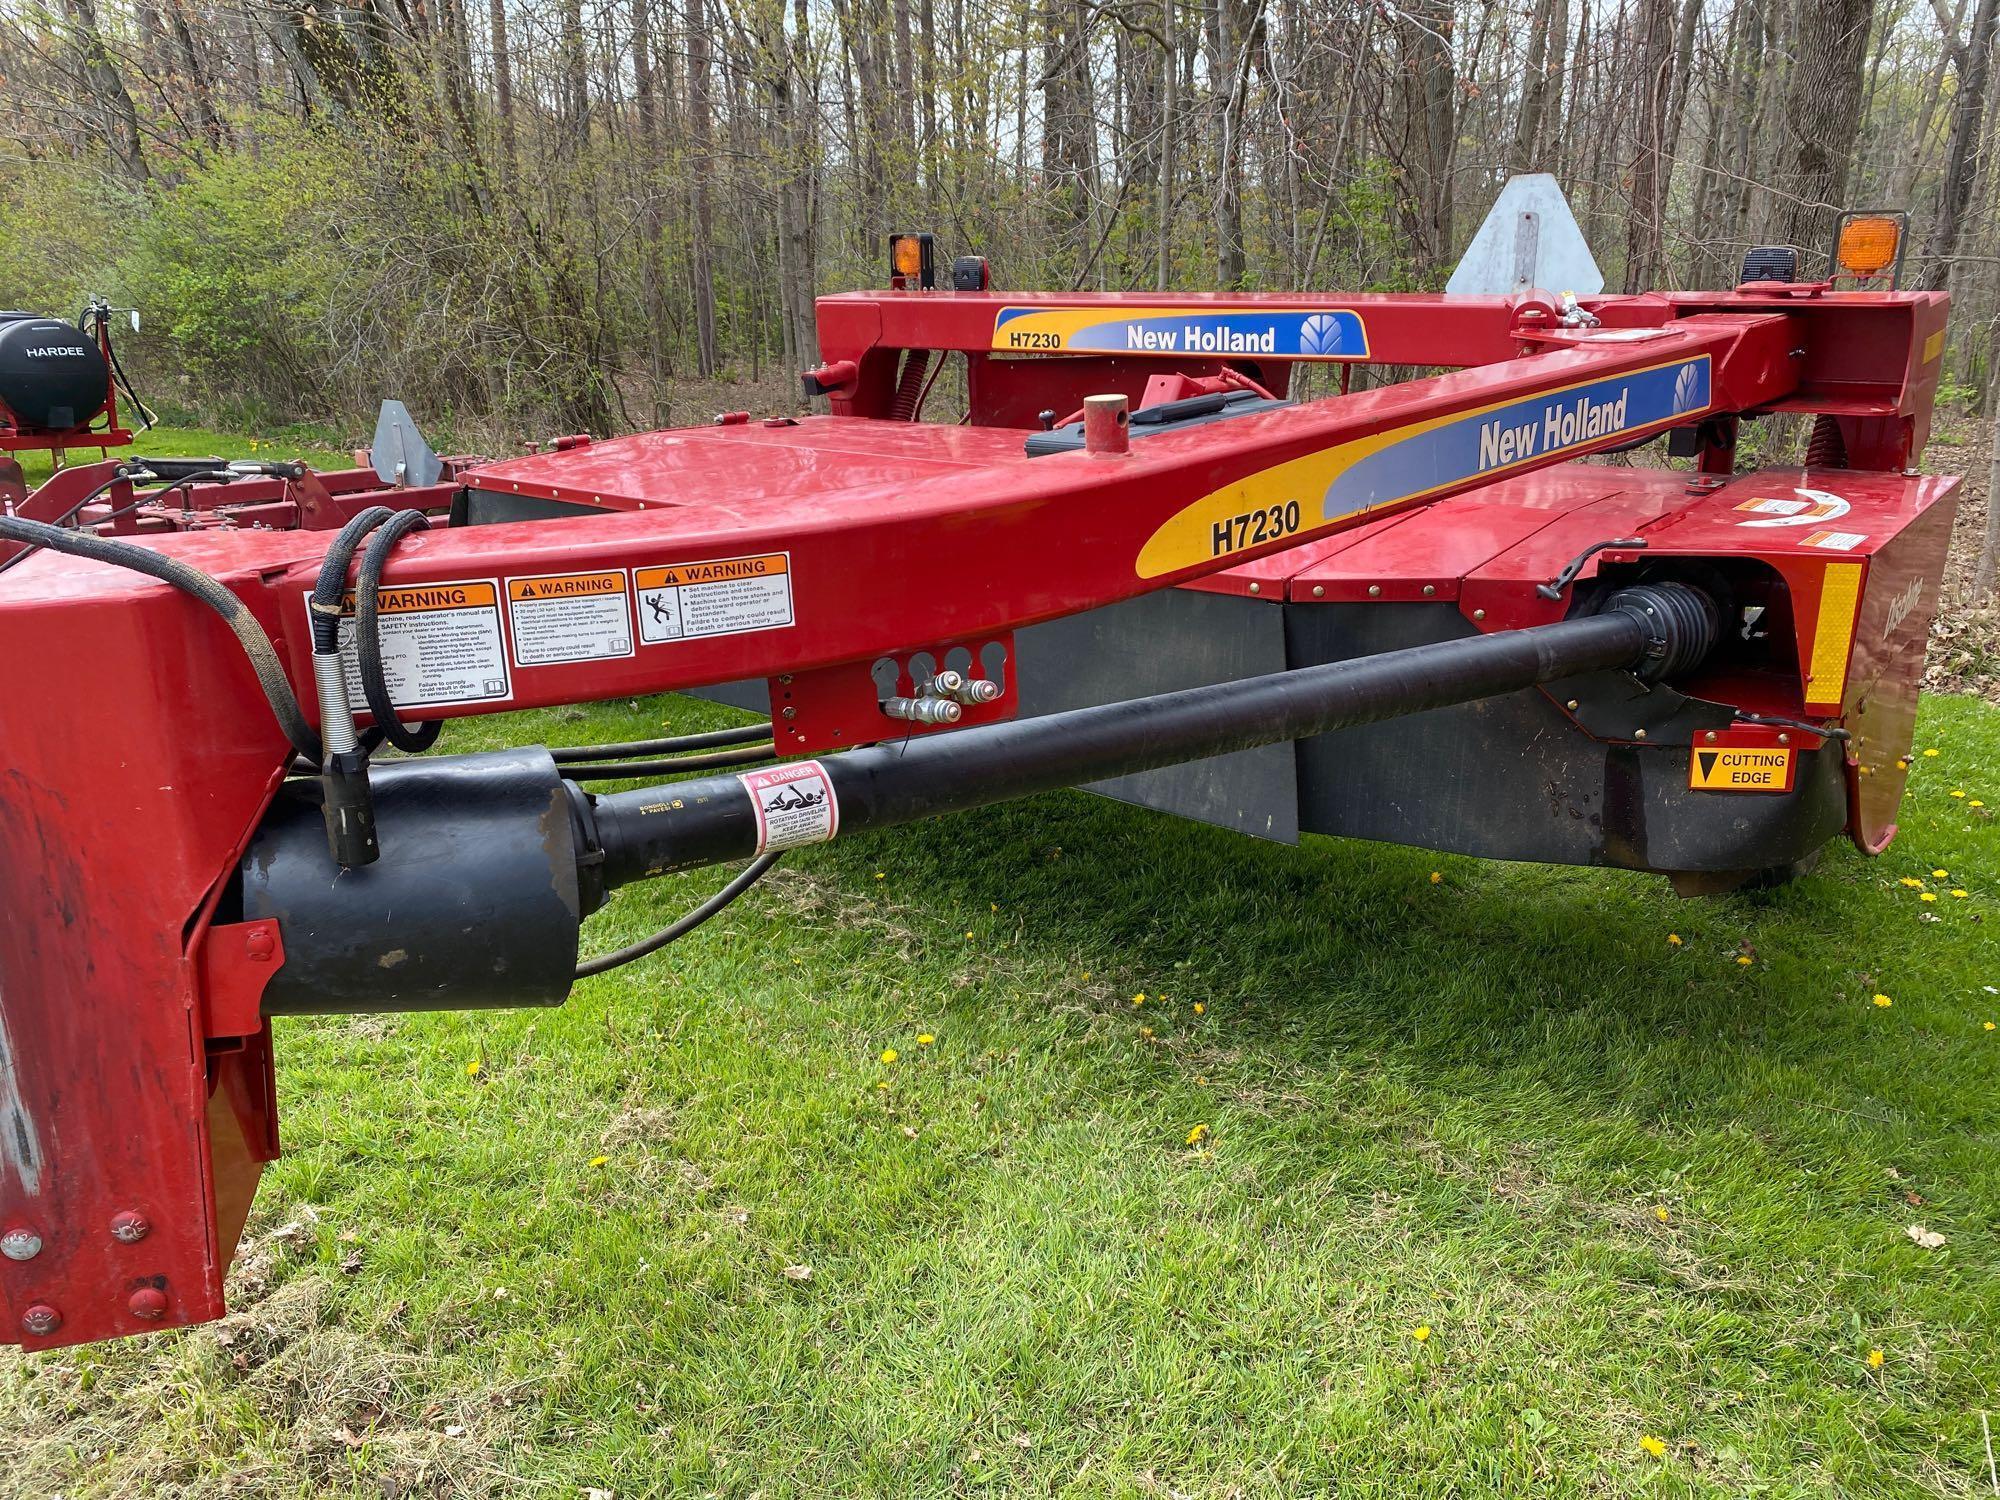 New Holland H7230 discbine, 10ft6in